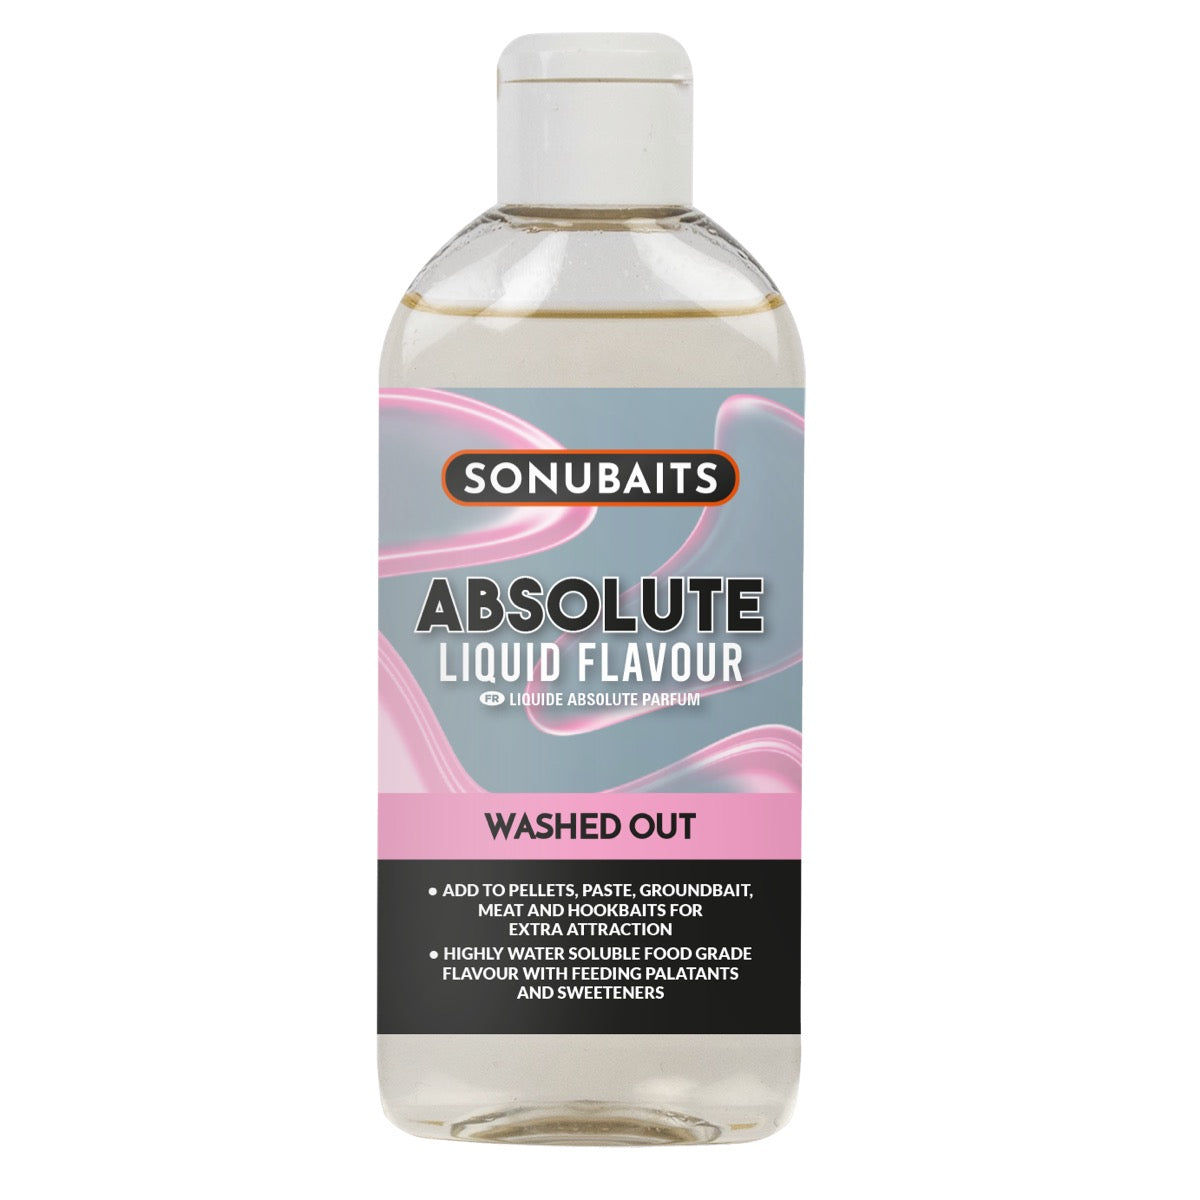 Sonubaits absolute liquid flavour Washed Out